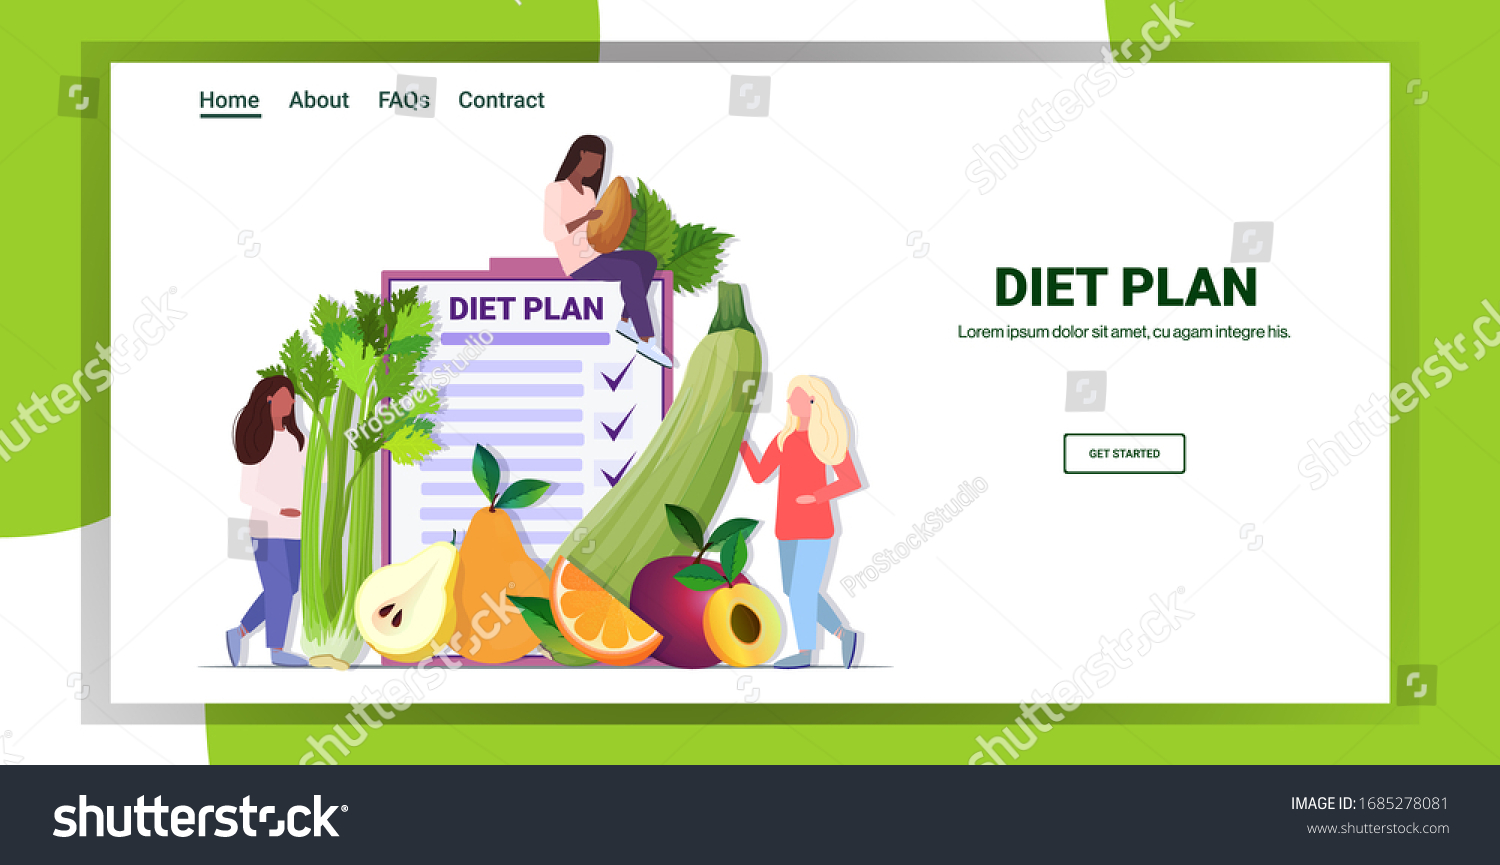 SVG of people holding different organic fruits herbs mix race women planning weight loss program diet plan healthy nutrition concept horizontal copy space vector illustration svg